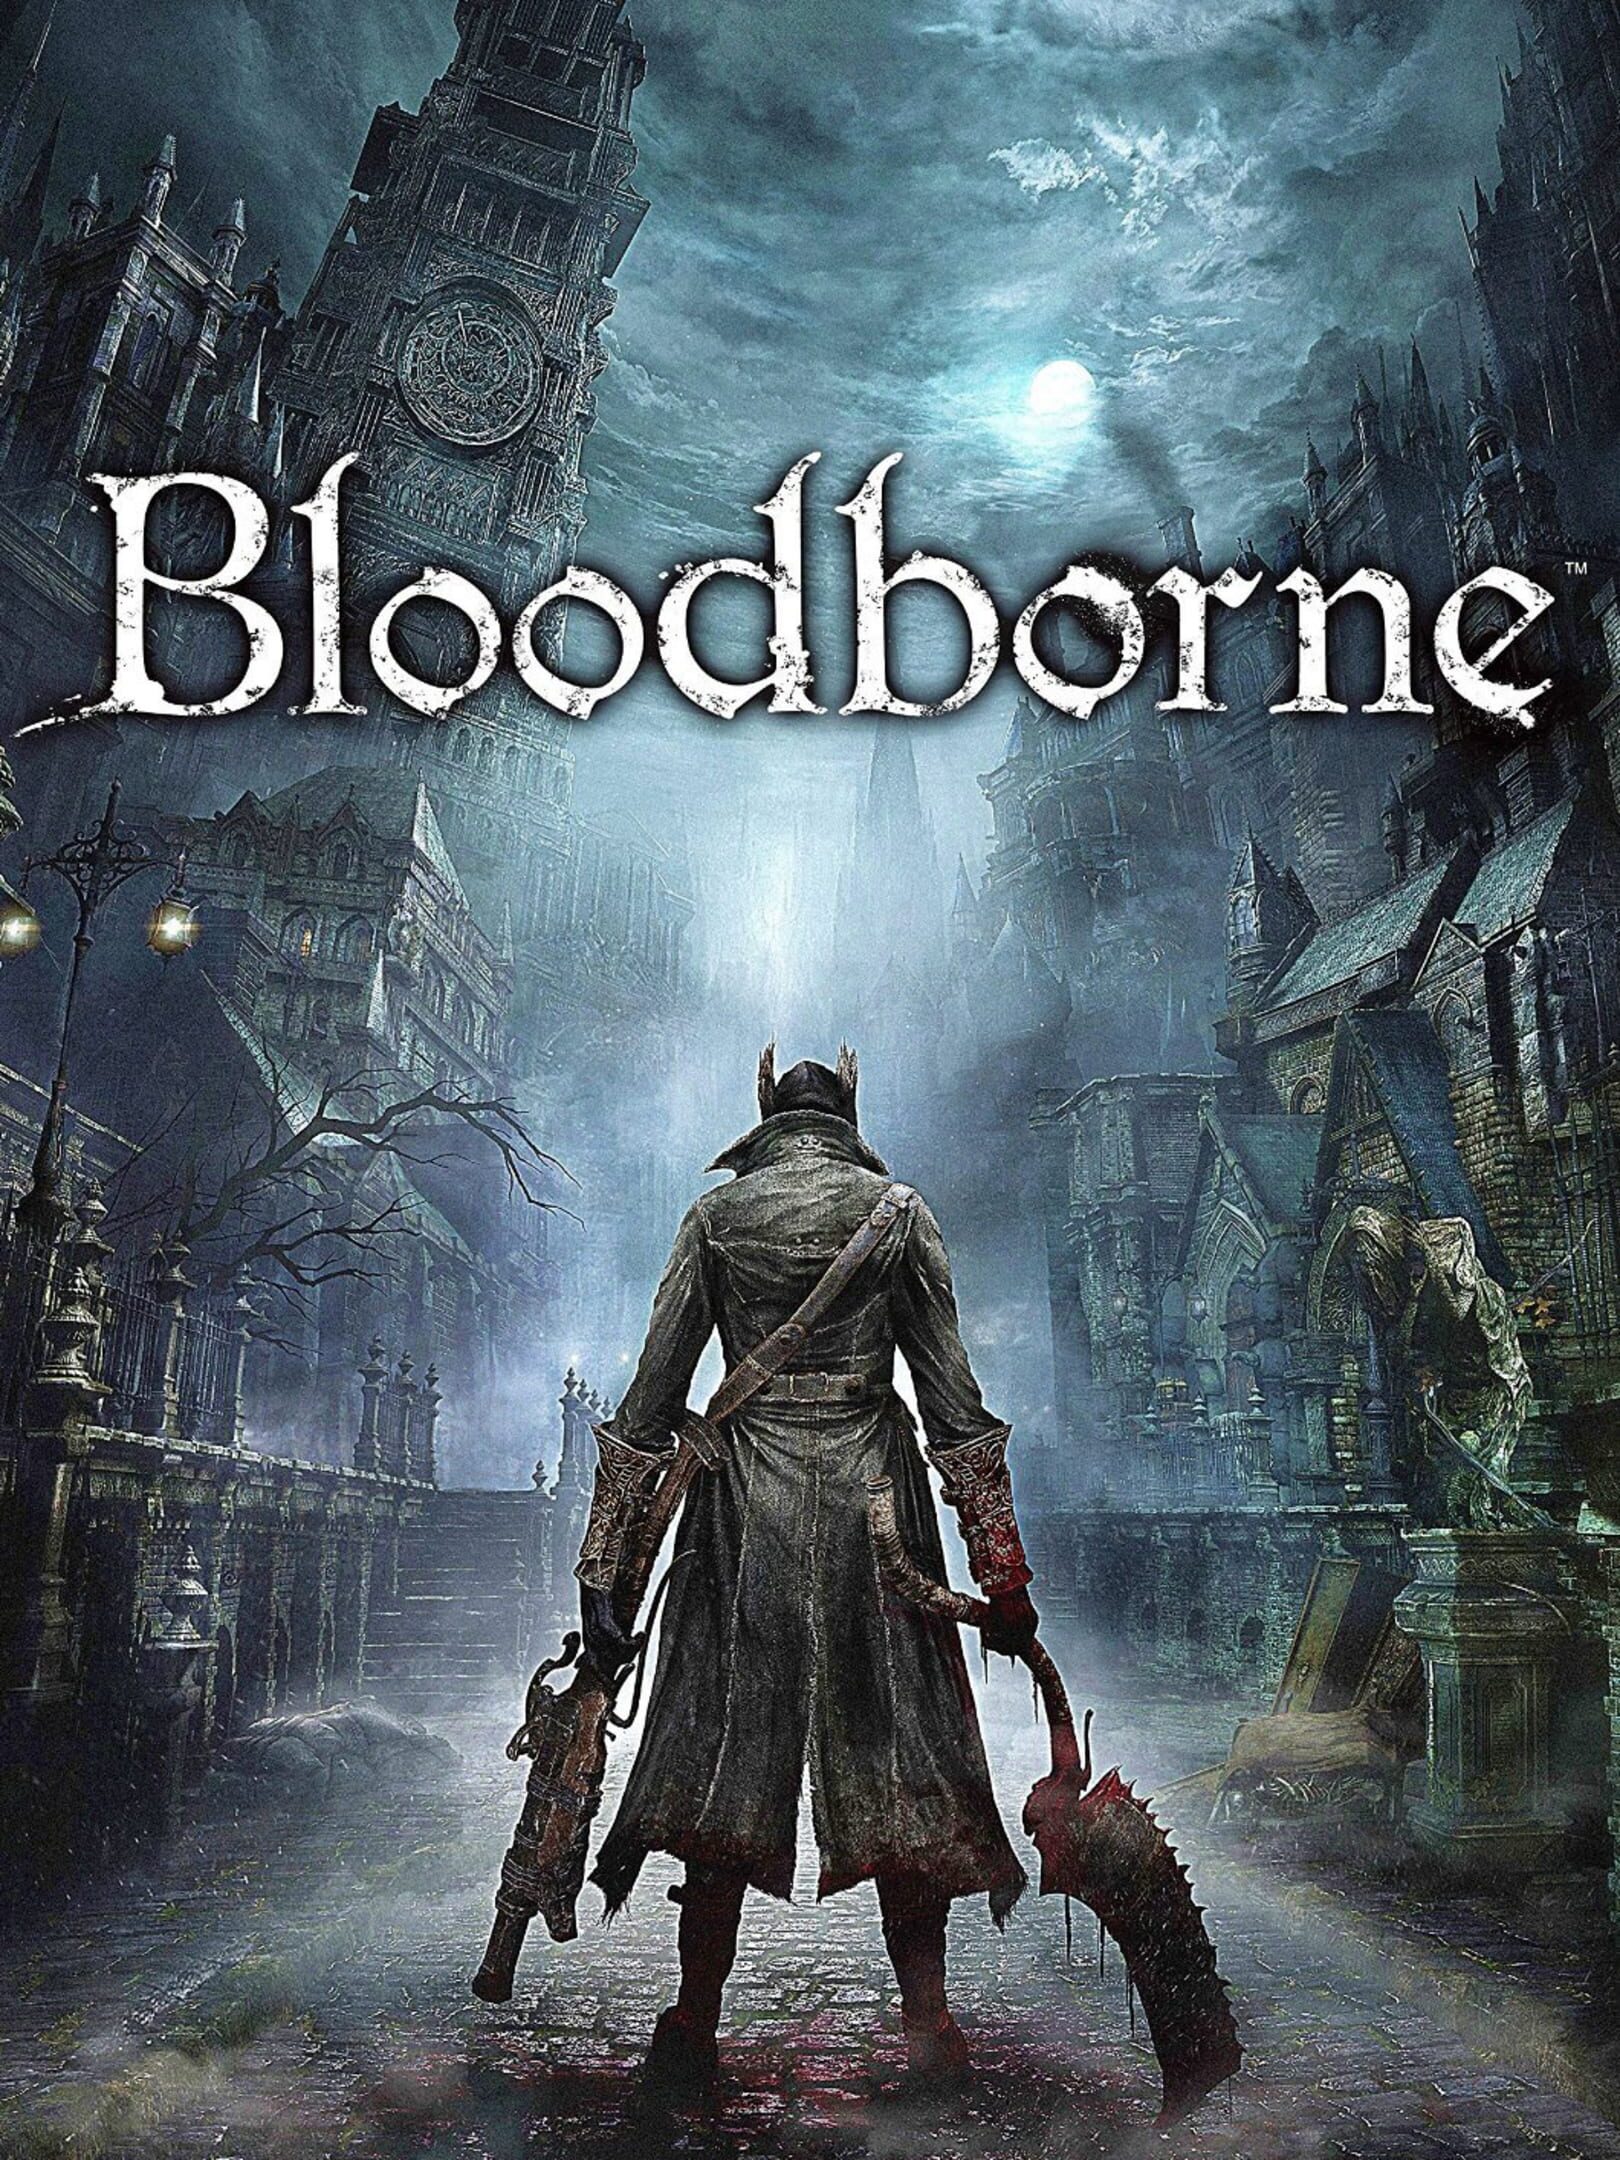 Is The Bloodborne PC Remaster Poster Real?